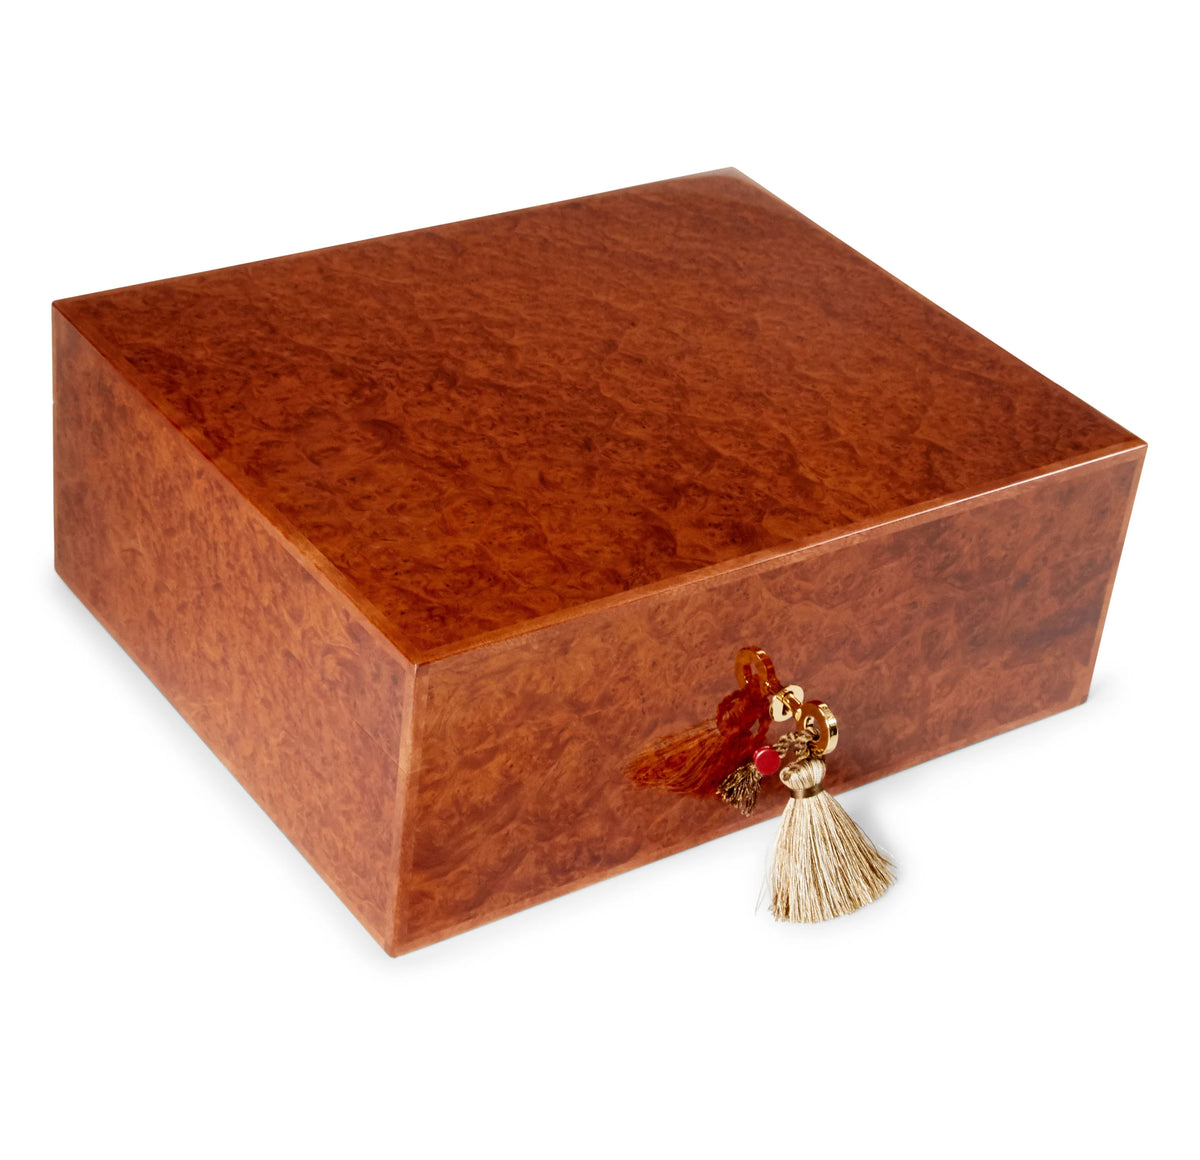 A wooden Elie Bleu Amboyna Burl "Classic" Humidor - 110 Cigars box with a tassel, perfect for cigar collection or tabletop humidors.